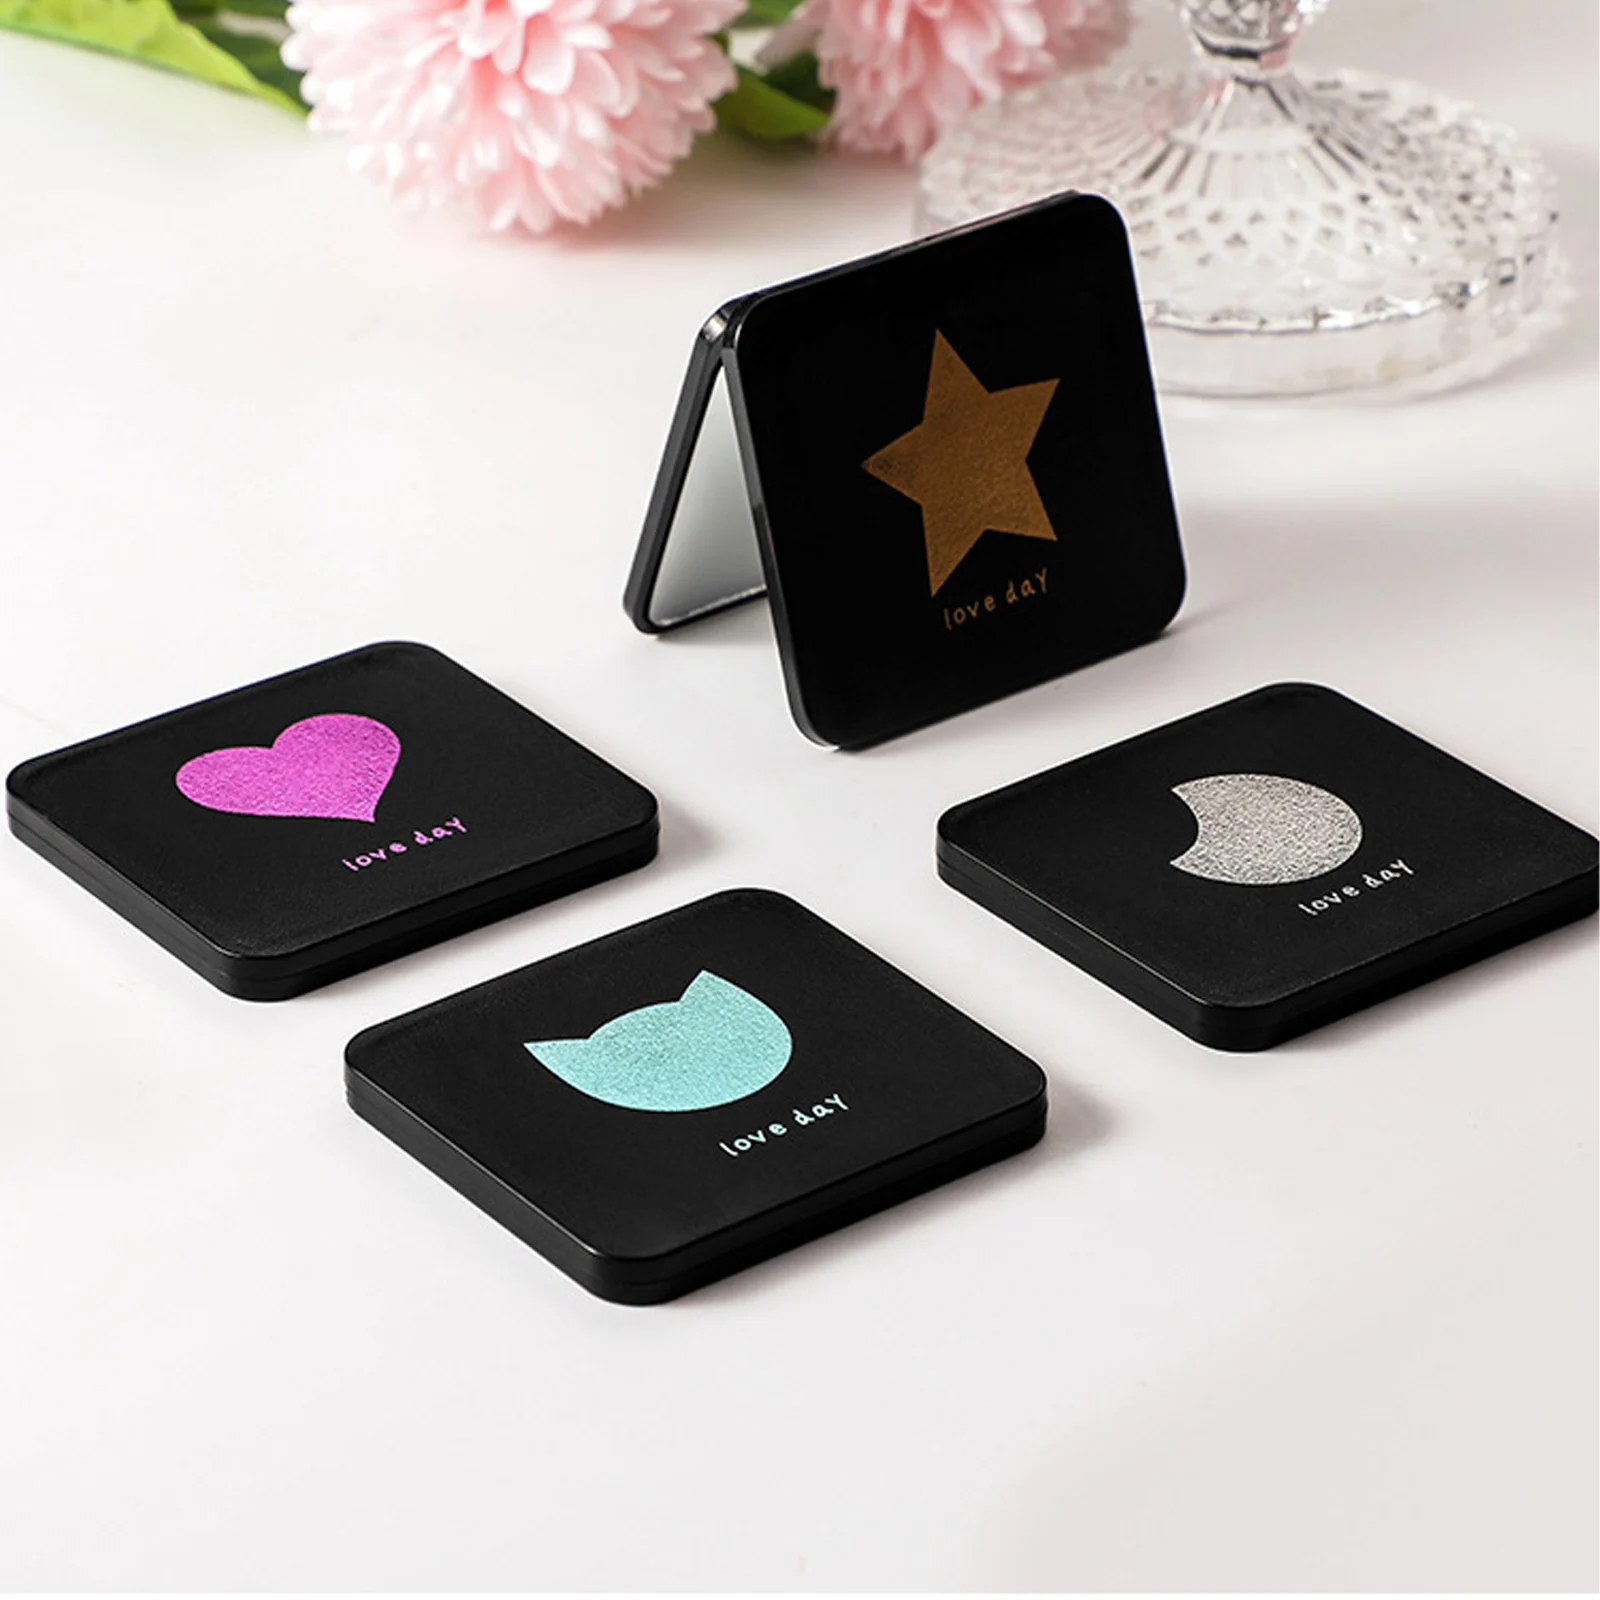 Mini Double Sided Makeup Mirror Folding Compact Mirror Female Portable Travel Square Handheld Pocket Mirror Makeup Accessories double sided trench coat women 2022new fashion spring autumn clothes hooded mid length windbreakers female outerwear casual tops